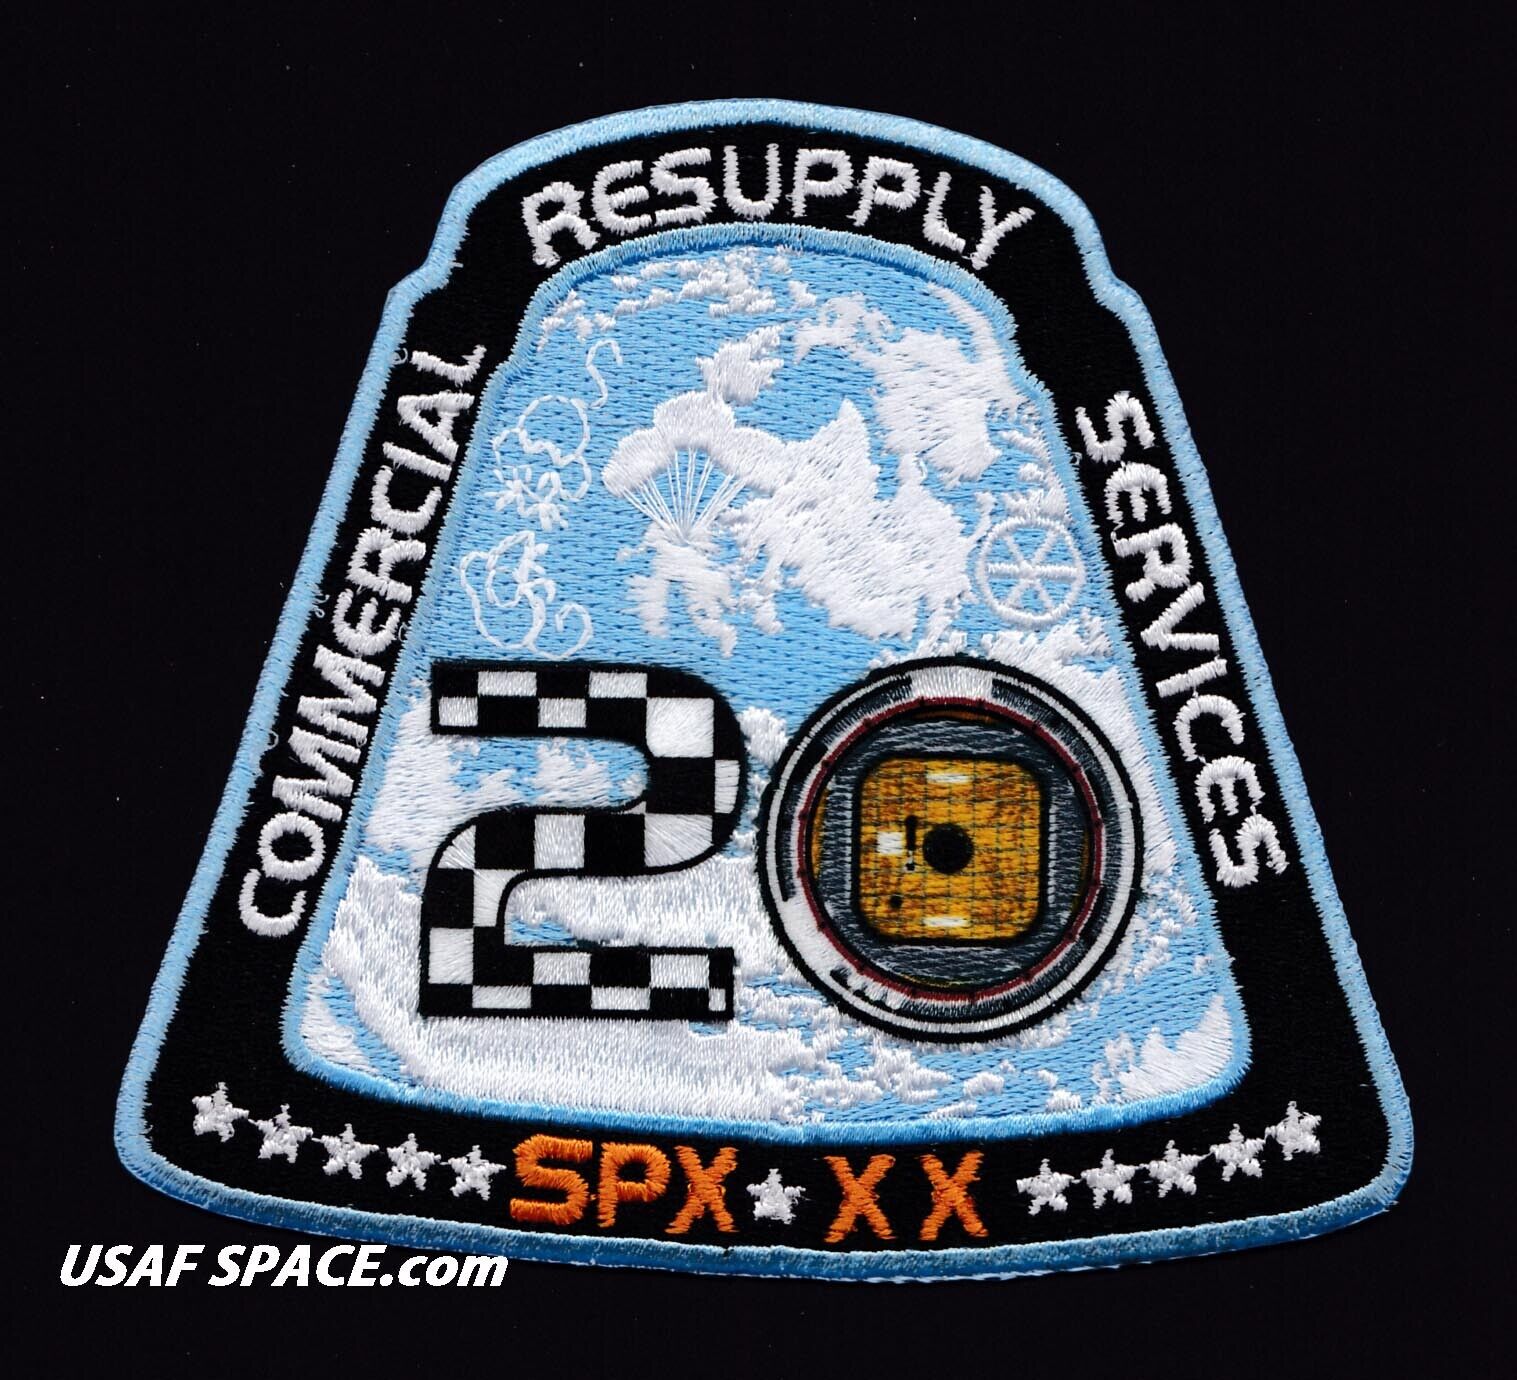 Authentic SPX-20 - SPACEX CRS-20 - NASA COMMERCIAL ISS RESUPPLY AB Emblem PATCH